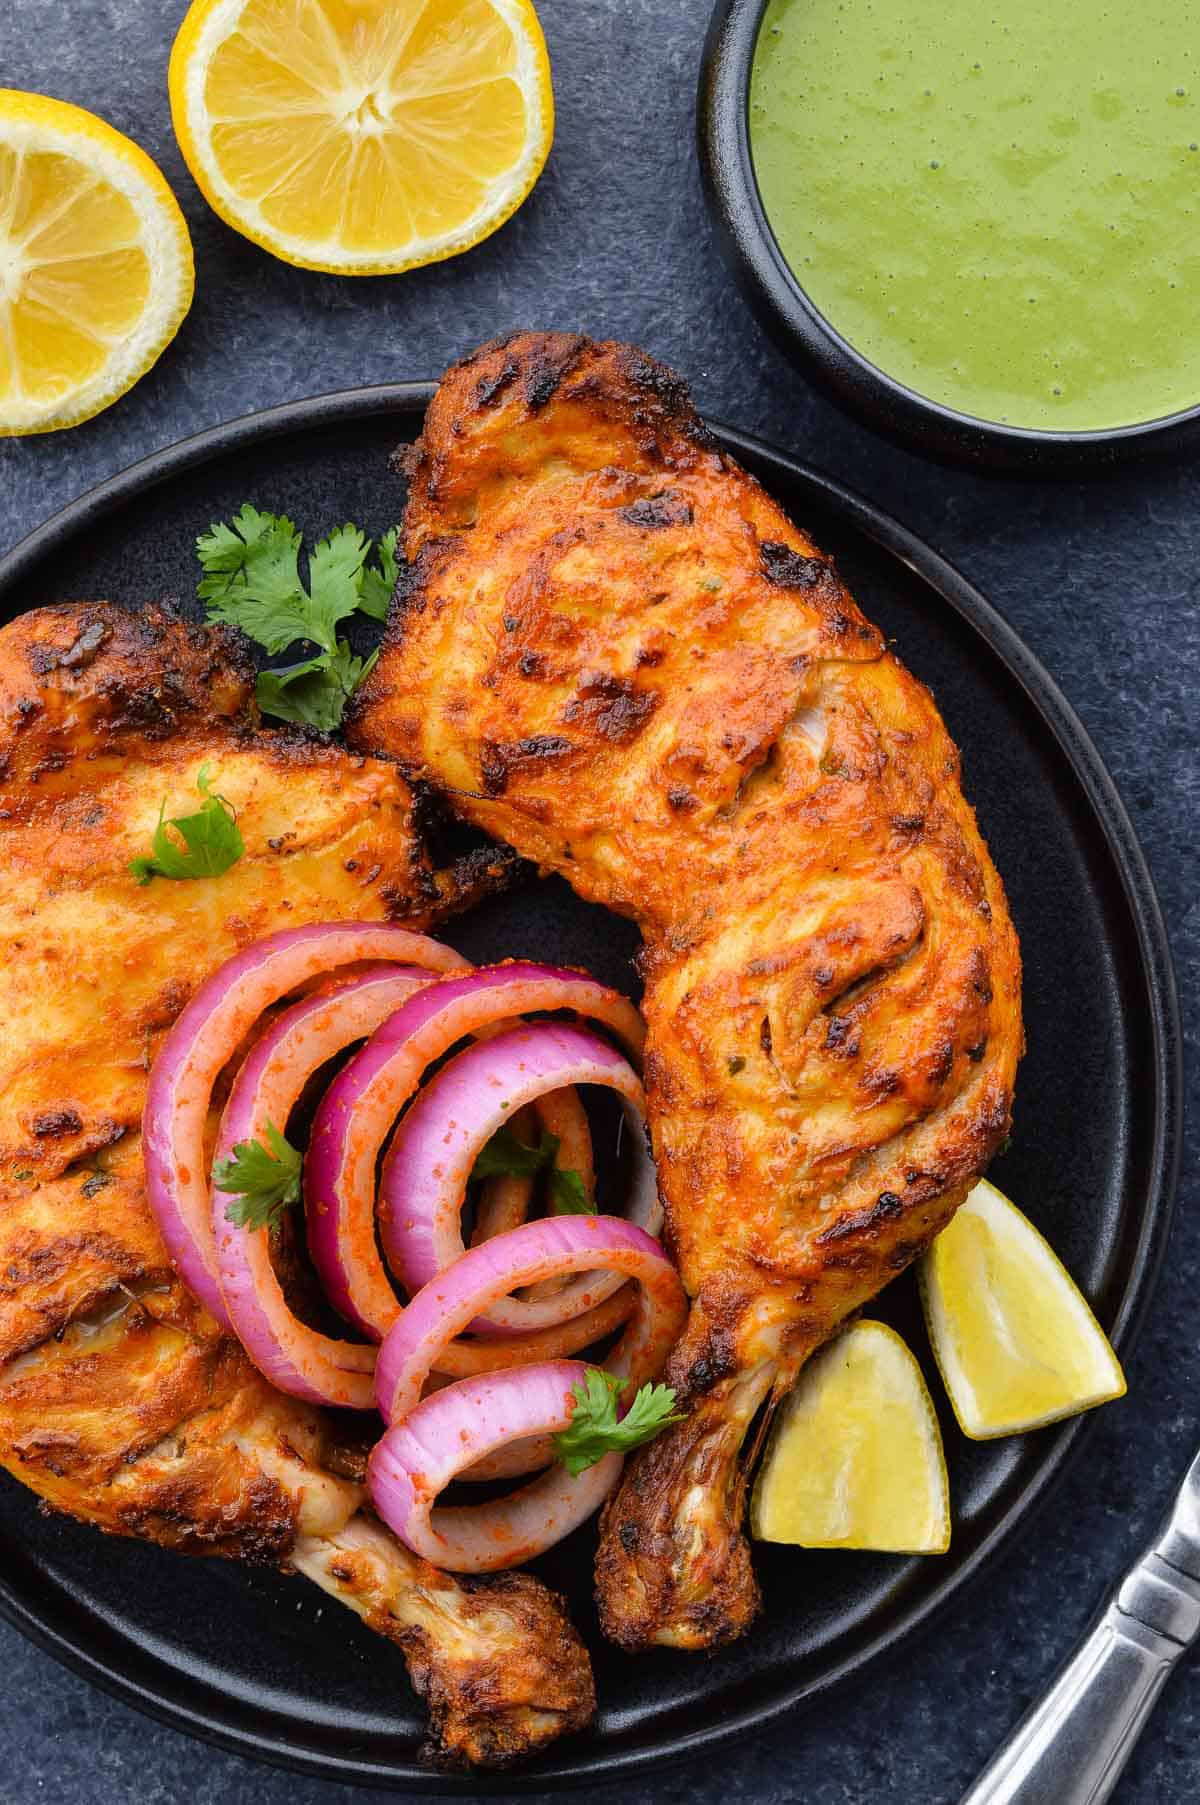 two tandoori chicken legs in a plate, along with laccha pyaaz, a couple lemon wedges & chopped coriander leaves, and a bowl of green chutney on the side.